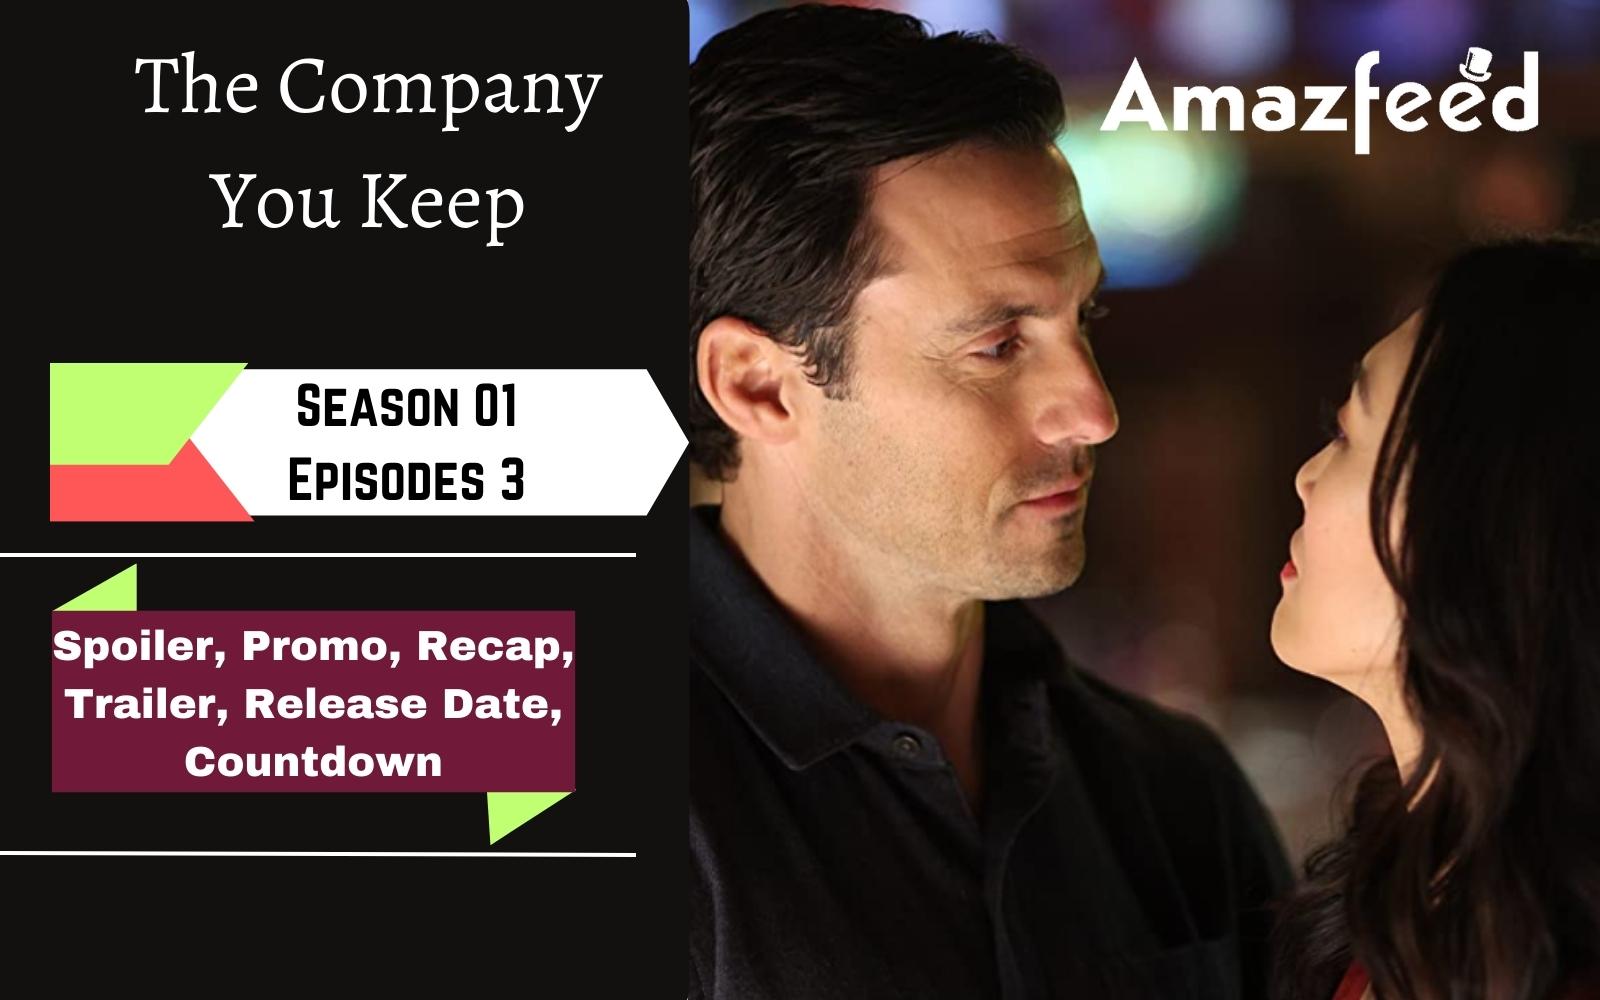 The Company You Keep Episode 3